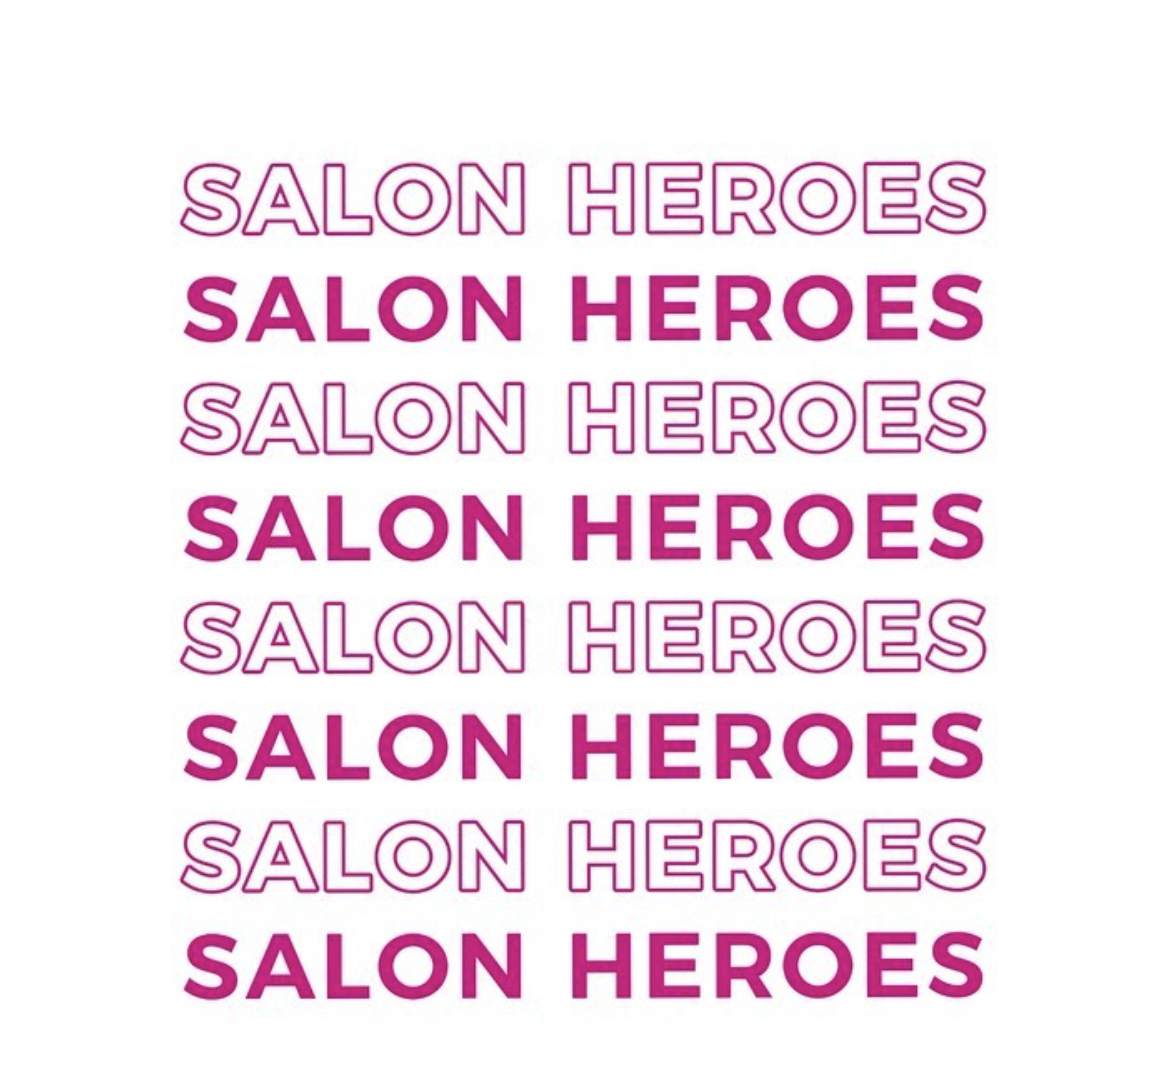 Dyson & Mane Addicts Team Up to Support Salon Heroes + More Beauty News This Week